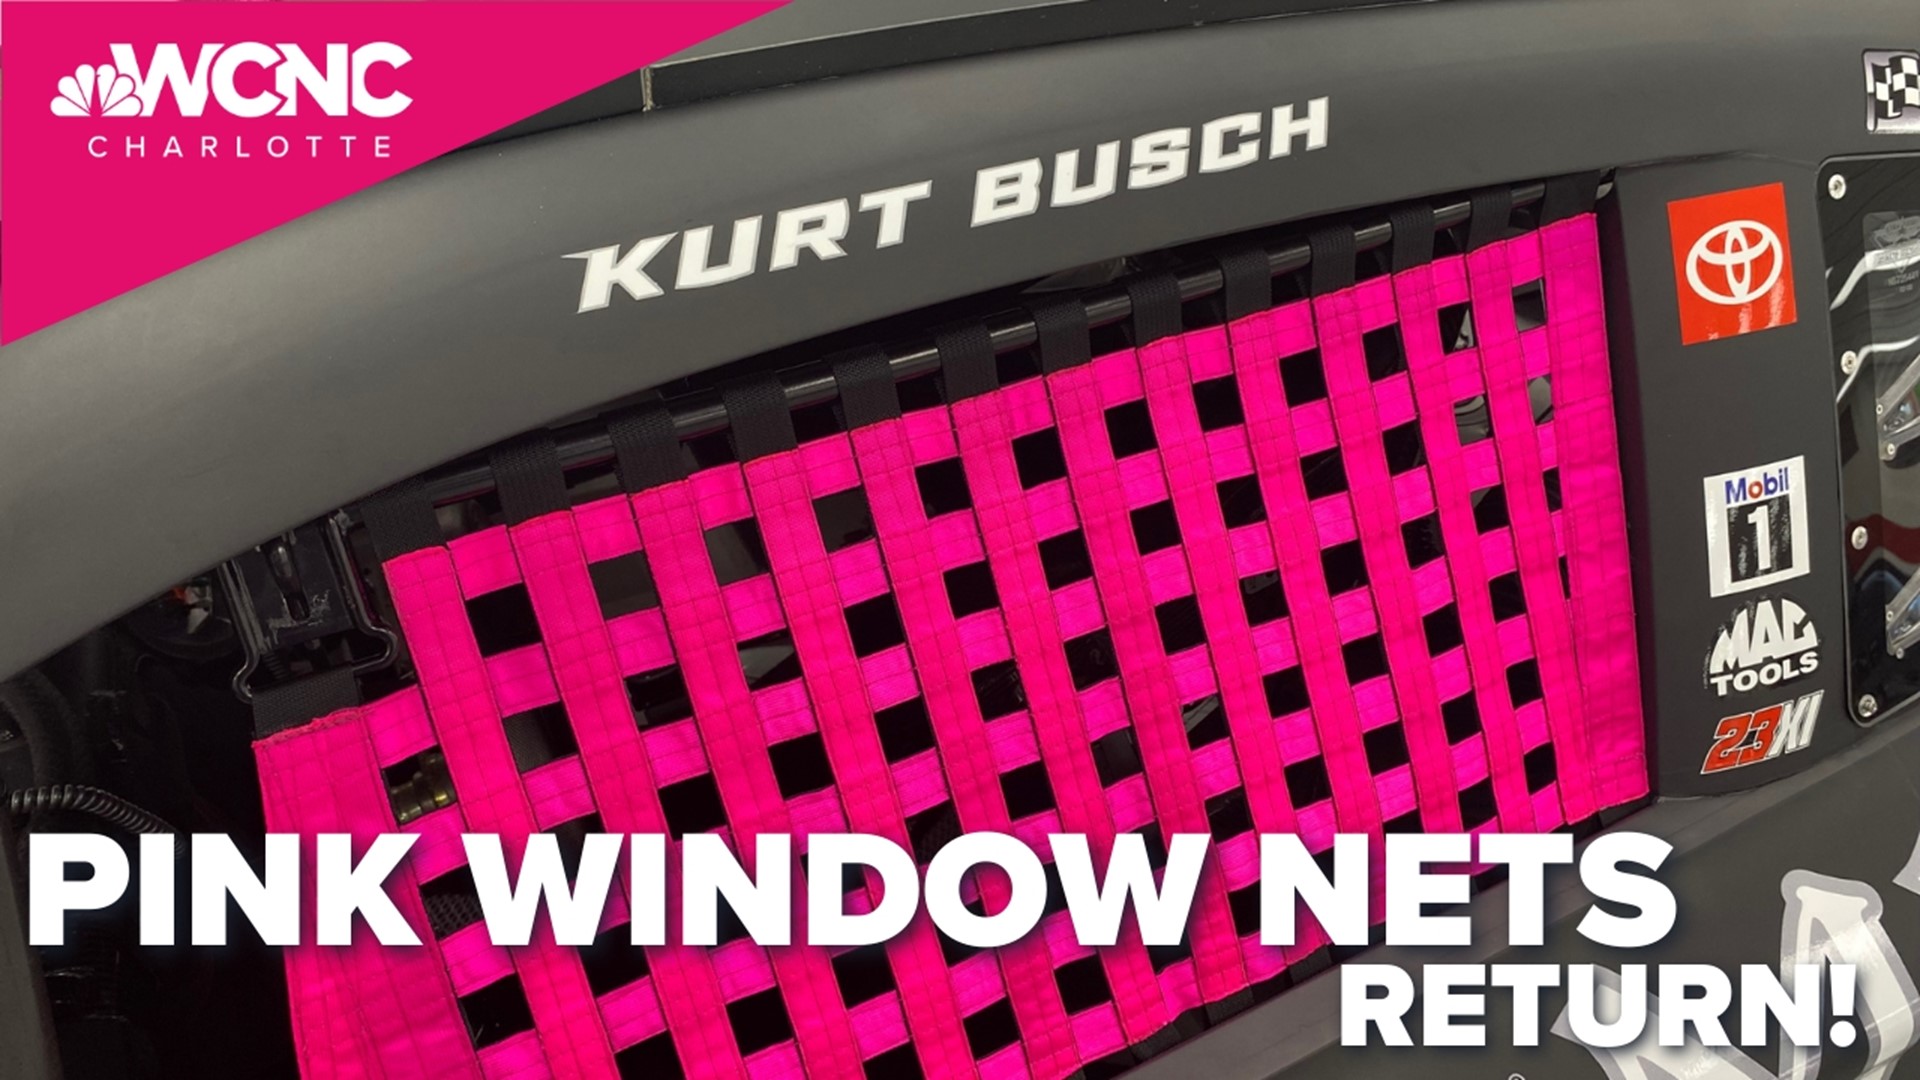 NASCAR champion Kurt Busch started the Window of Hope program to support breast cancer survivors and raise money for those battling the deadly disease.